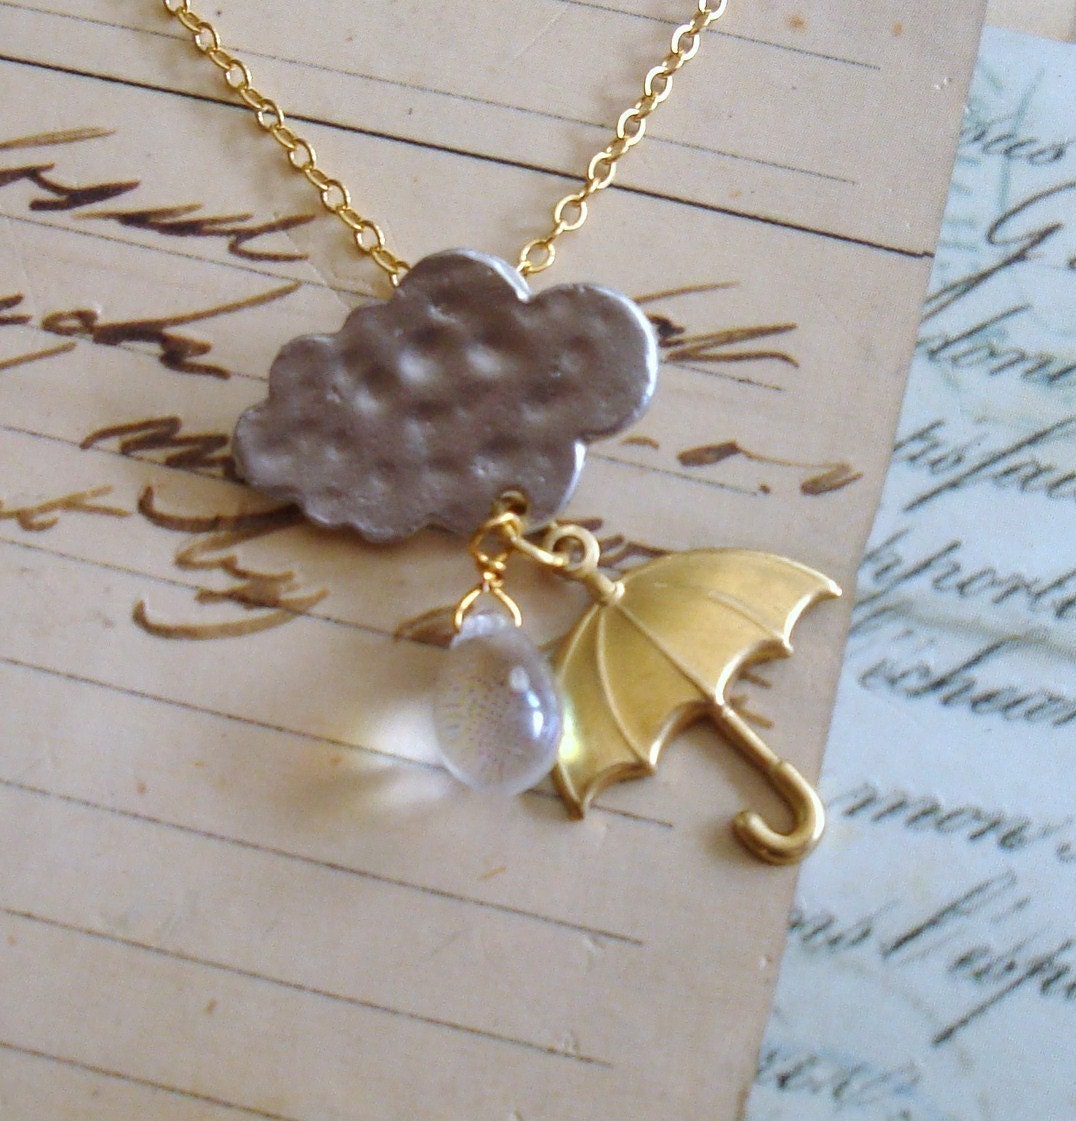 Rain Cloud with Umbrella Necklace. FREE WORLDWIDE SHIPPING.